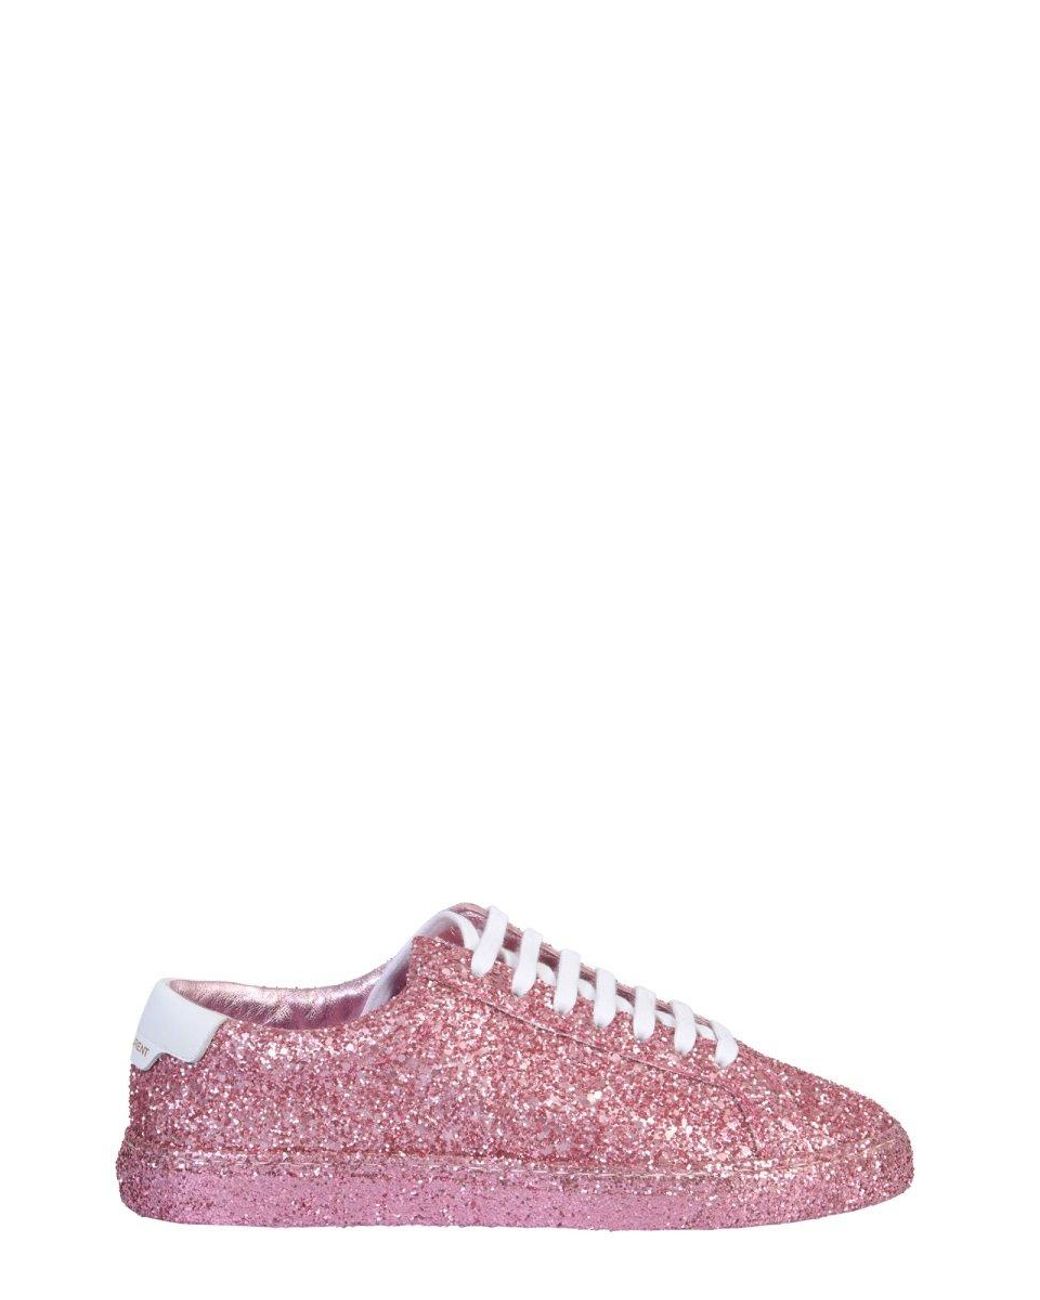 Saint Laurent Glitter-coated Andy Sneakers in Pink | Lyst